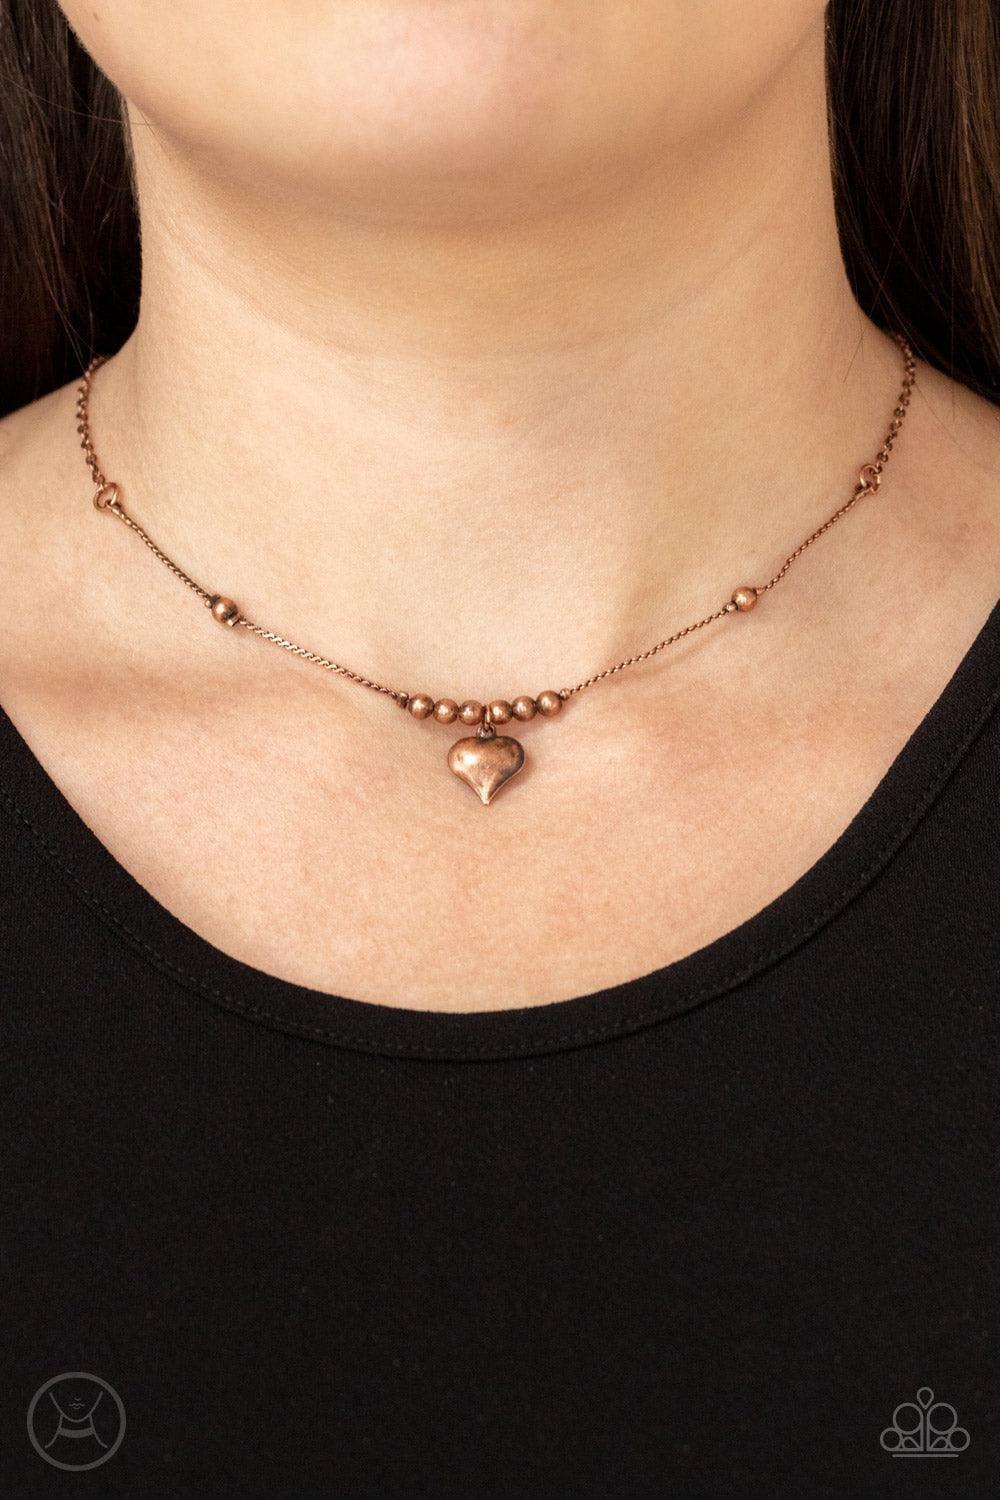 Paparazzi Accessories - Casual Crush - Copper Choker Necklace - Bling by JessieK